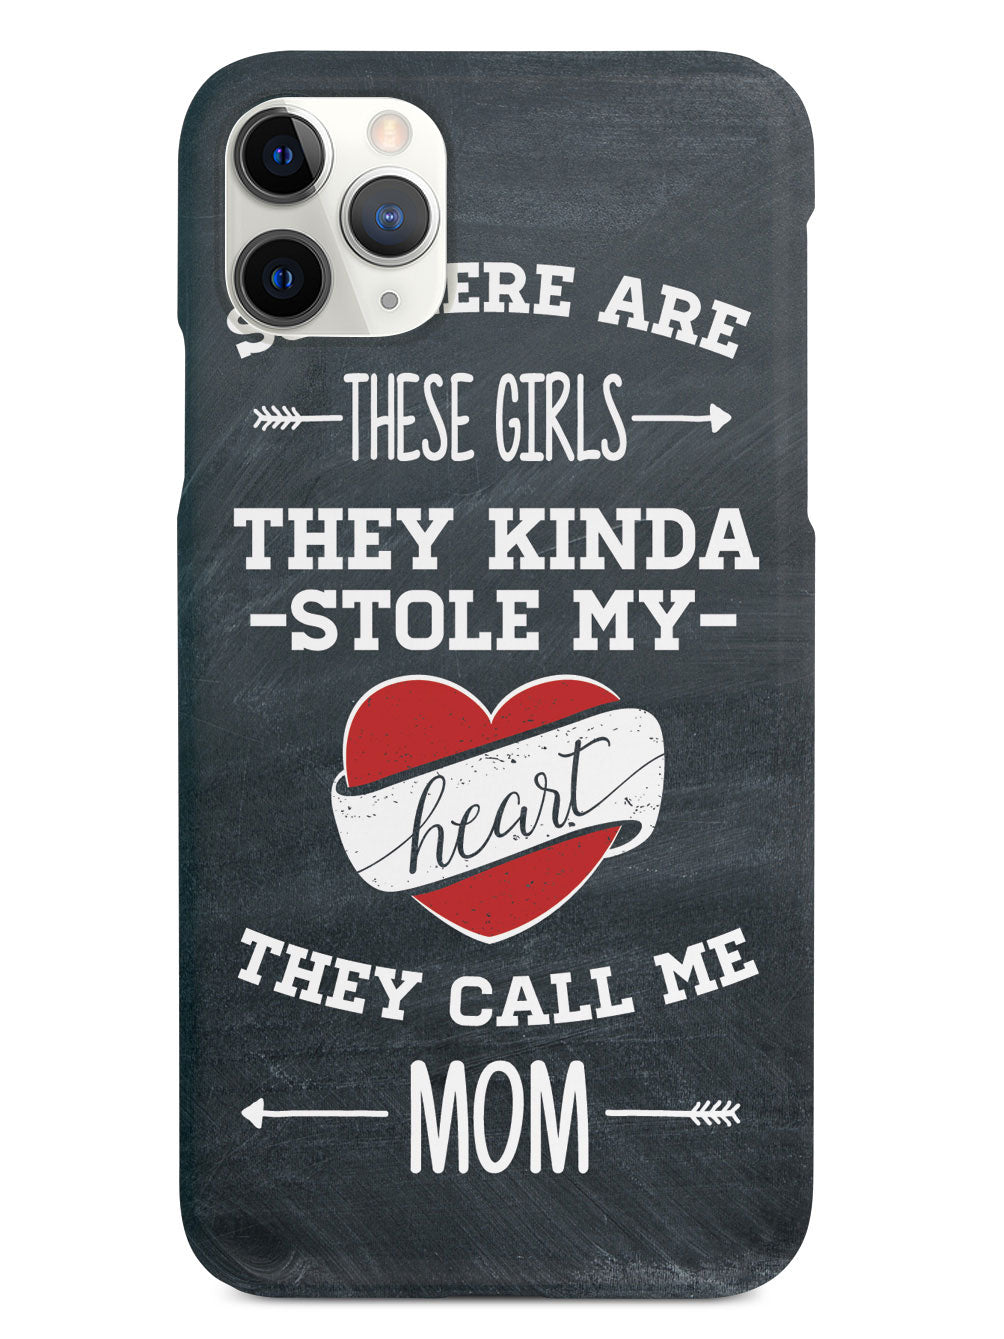 So There Are These Girls - Mom Case